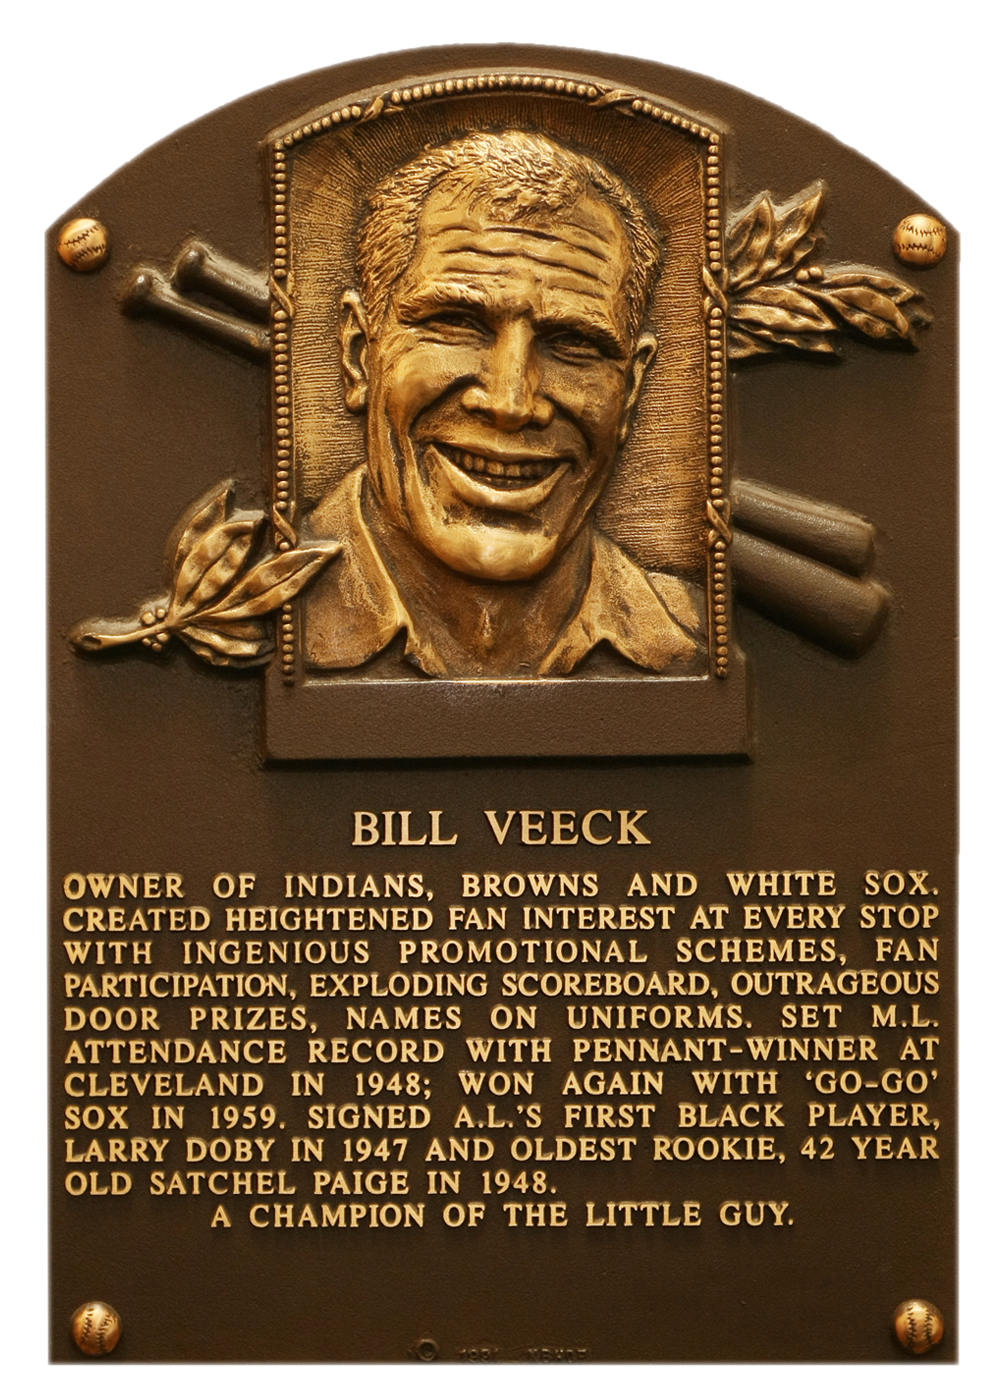 Bill Veeck Hall of Fame plaque